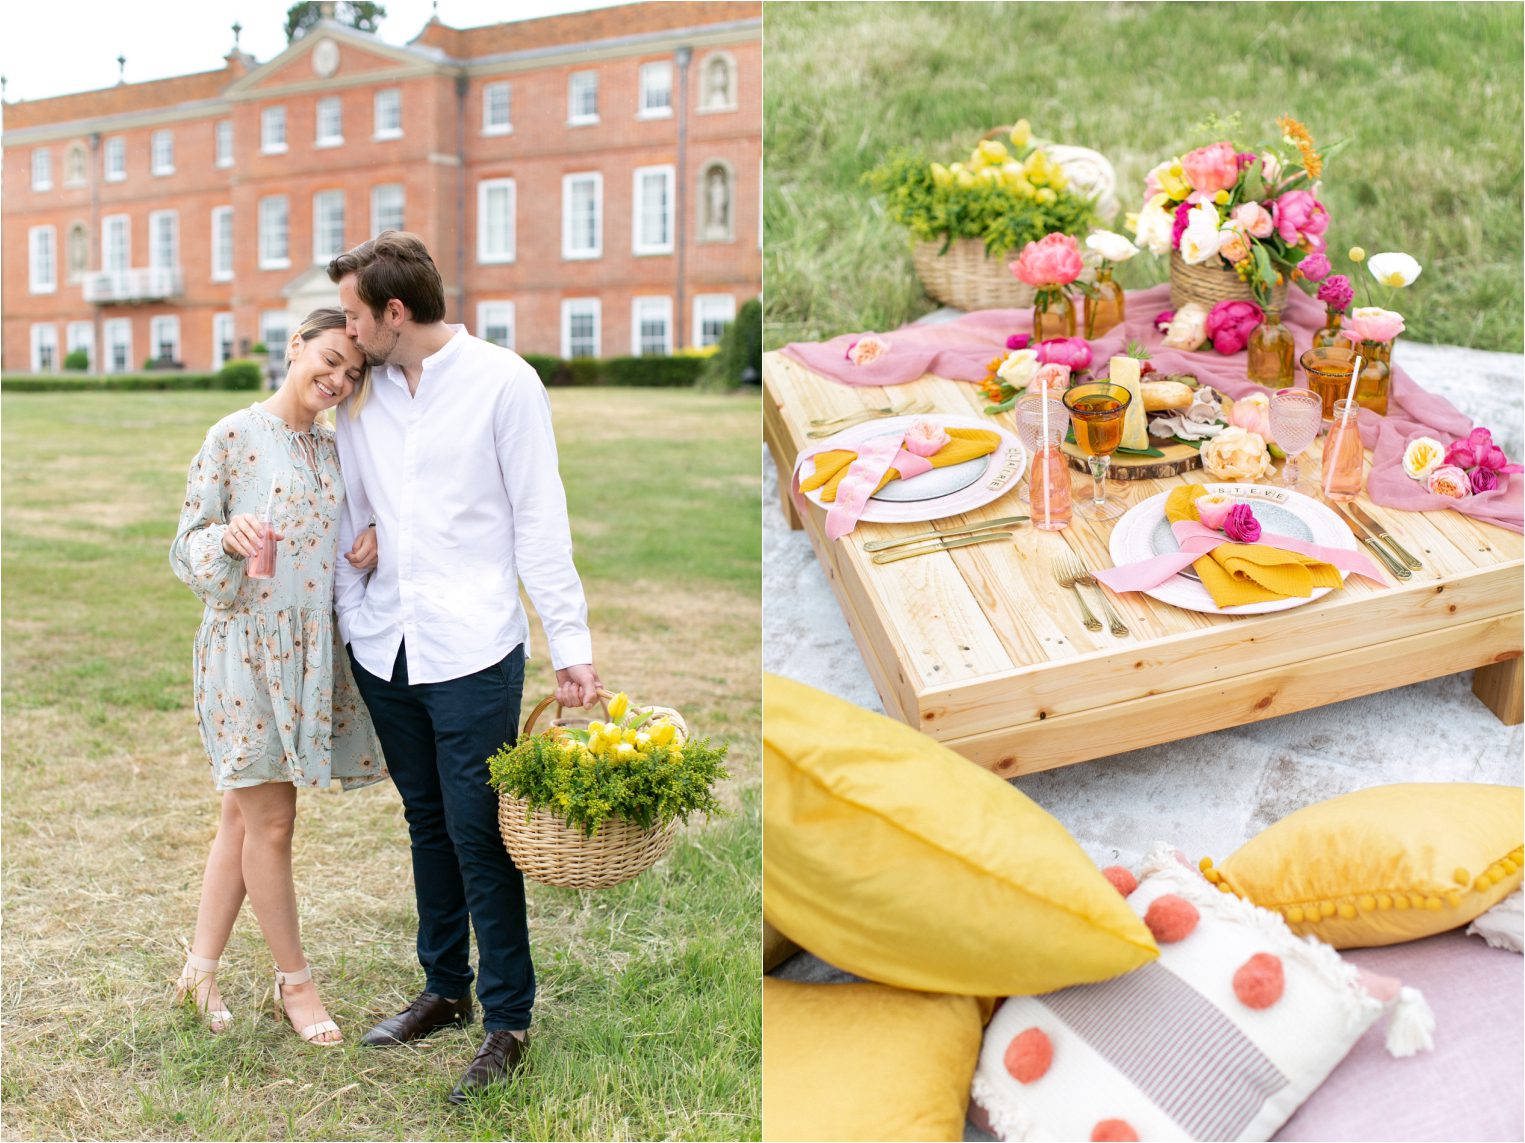 Romantic engagement photography by Anneli Marinovich